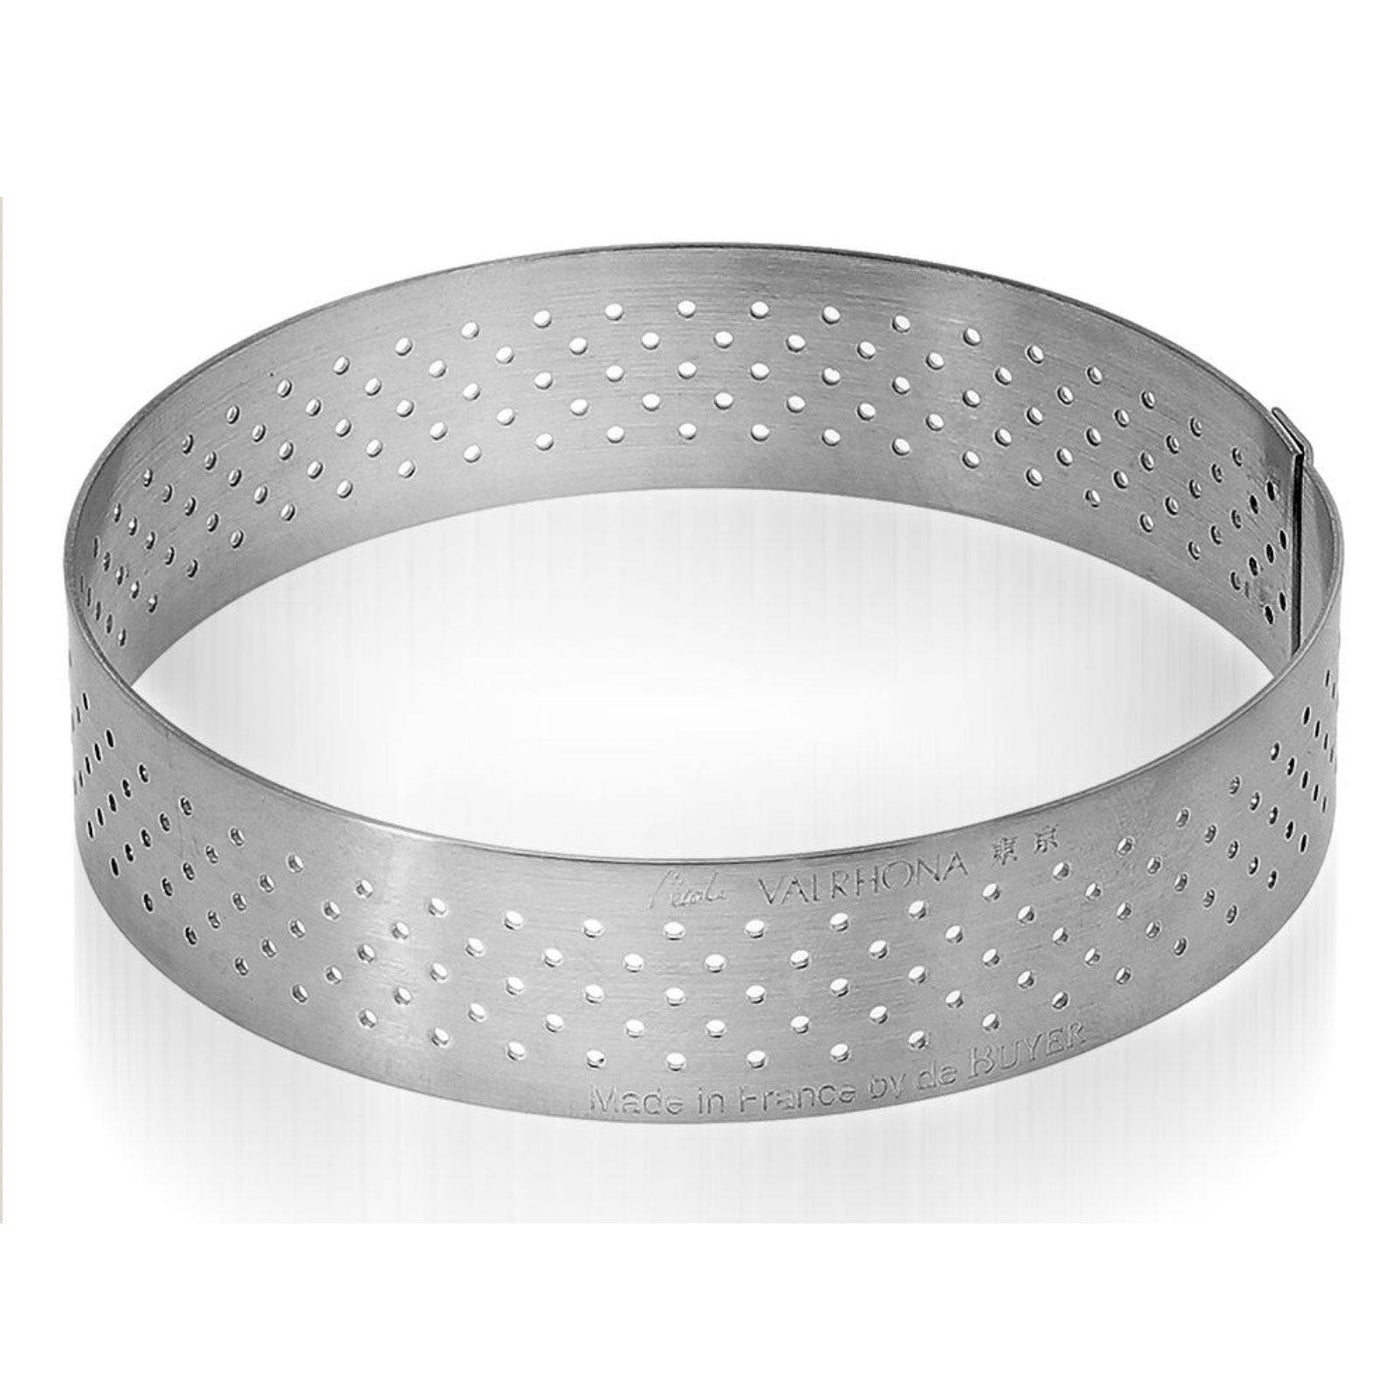 de Buyer Valrhona Stainless Steel Perforated Tart Ring, 3-in. - Kitchen Universe